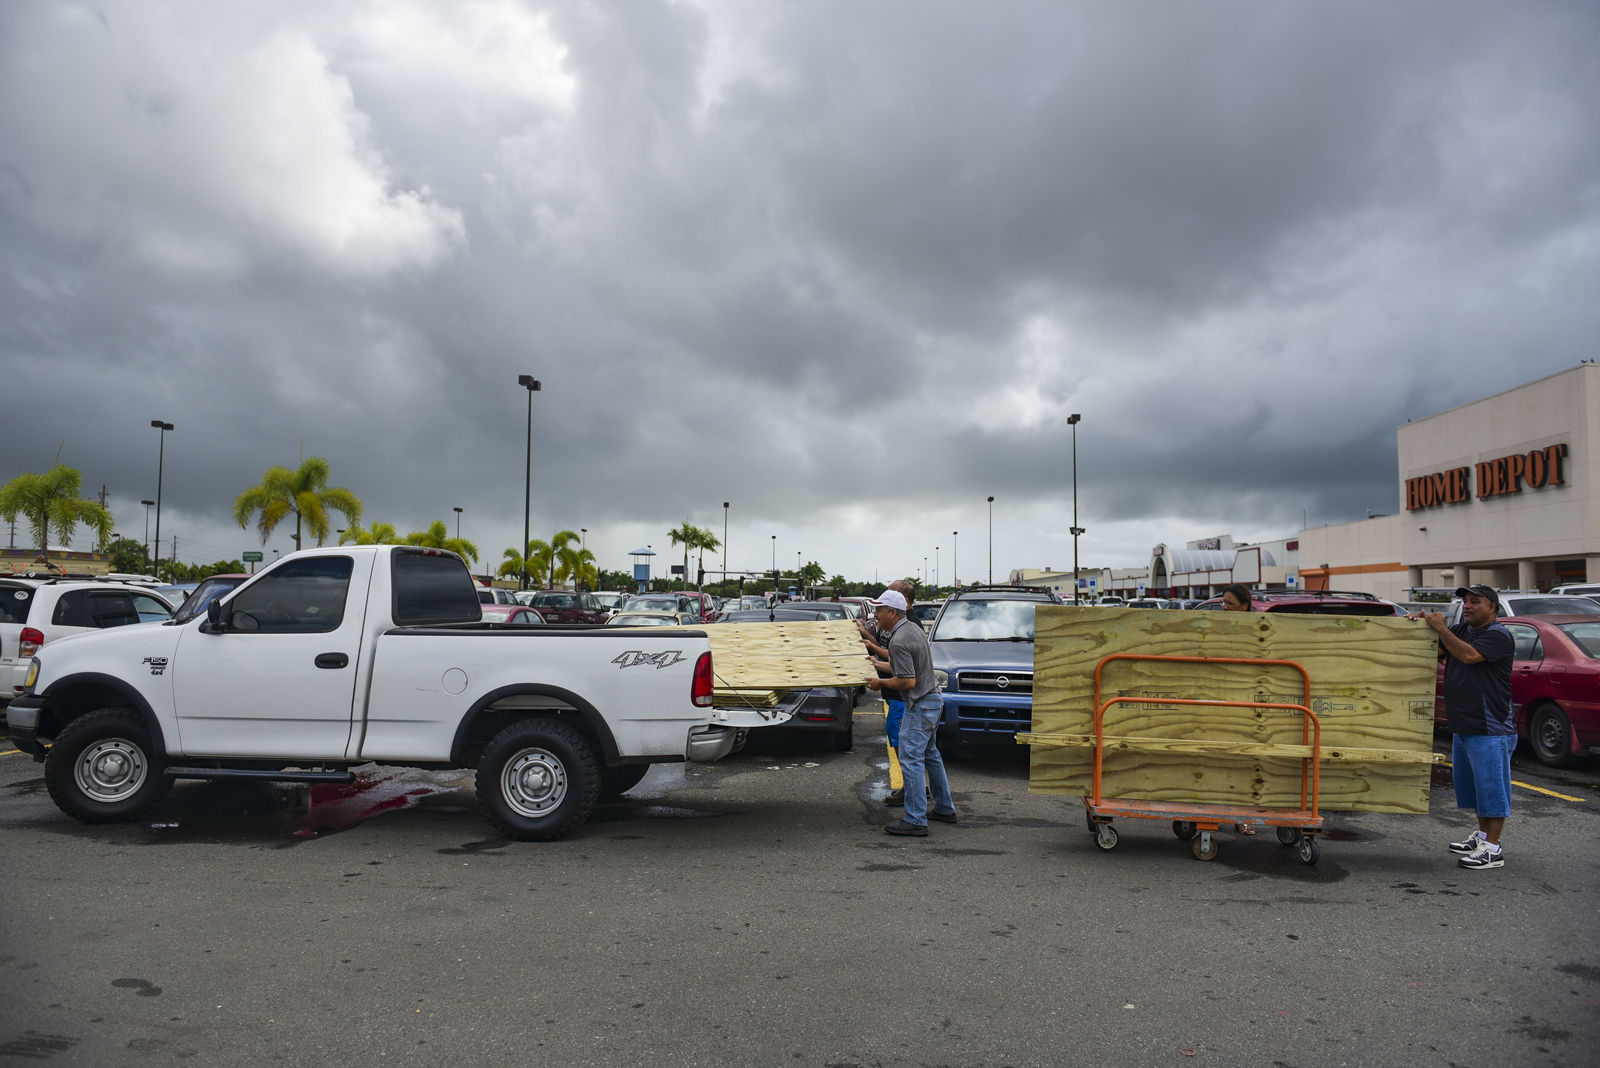 Men load recently purchased wood panels to be used for boarding up windows in preparation for Hurricane Irma, in Carolina, Puerto Rico, Tuesday, Sept. 5, 2017. Irma grew into a dangerous Category 5 storm, the most powerful seen in the Atlantic in over a decade, and roared toward islands in the northeast Caribbean Tuesday. (AP Photo/Carlos Giusti)